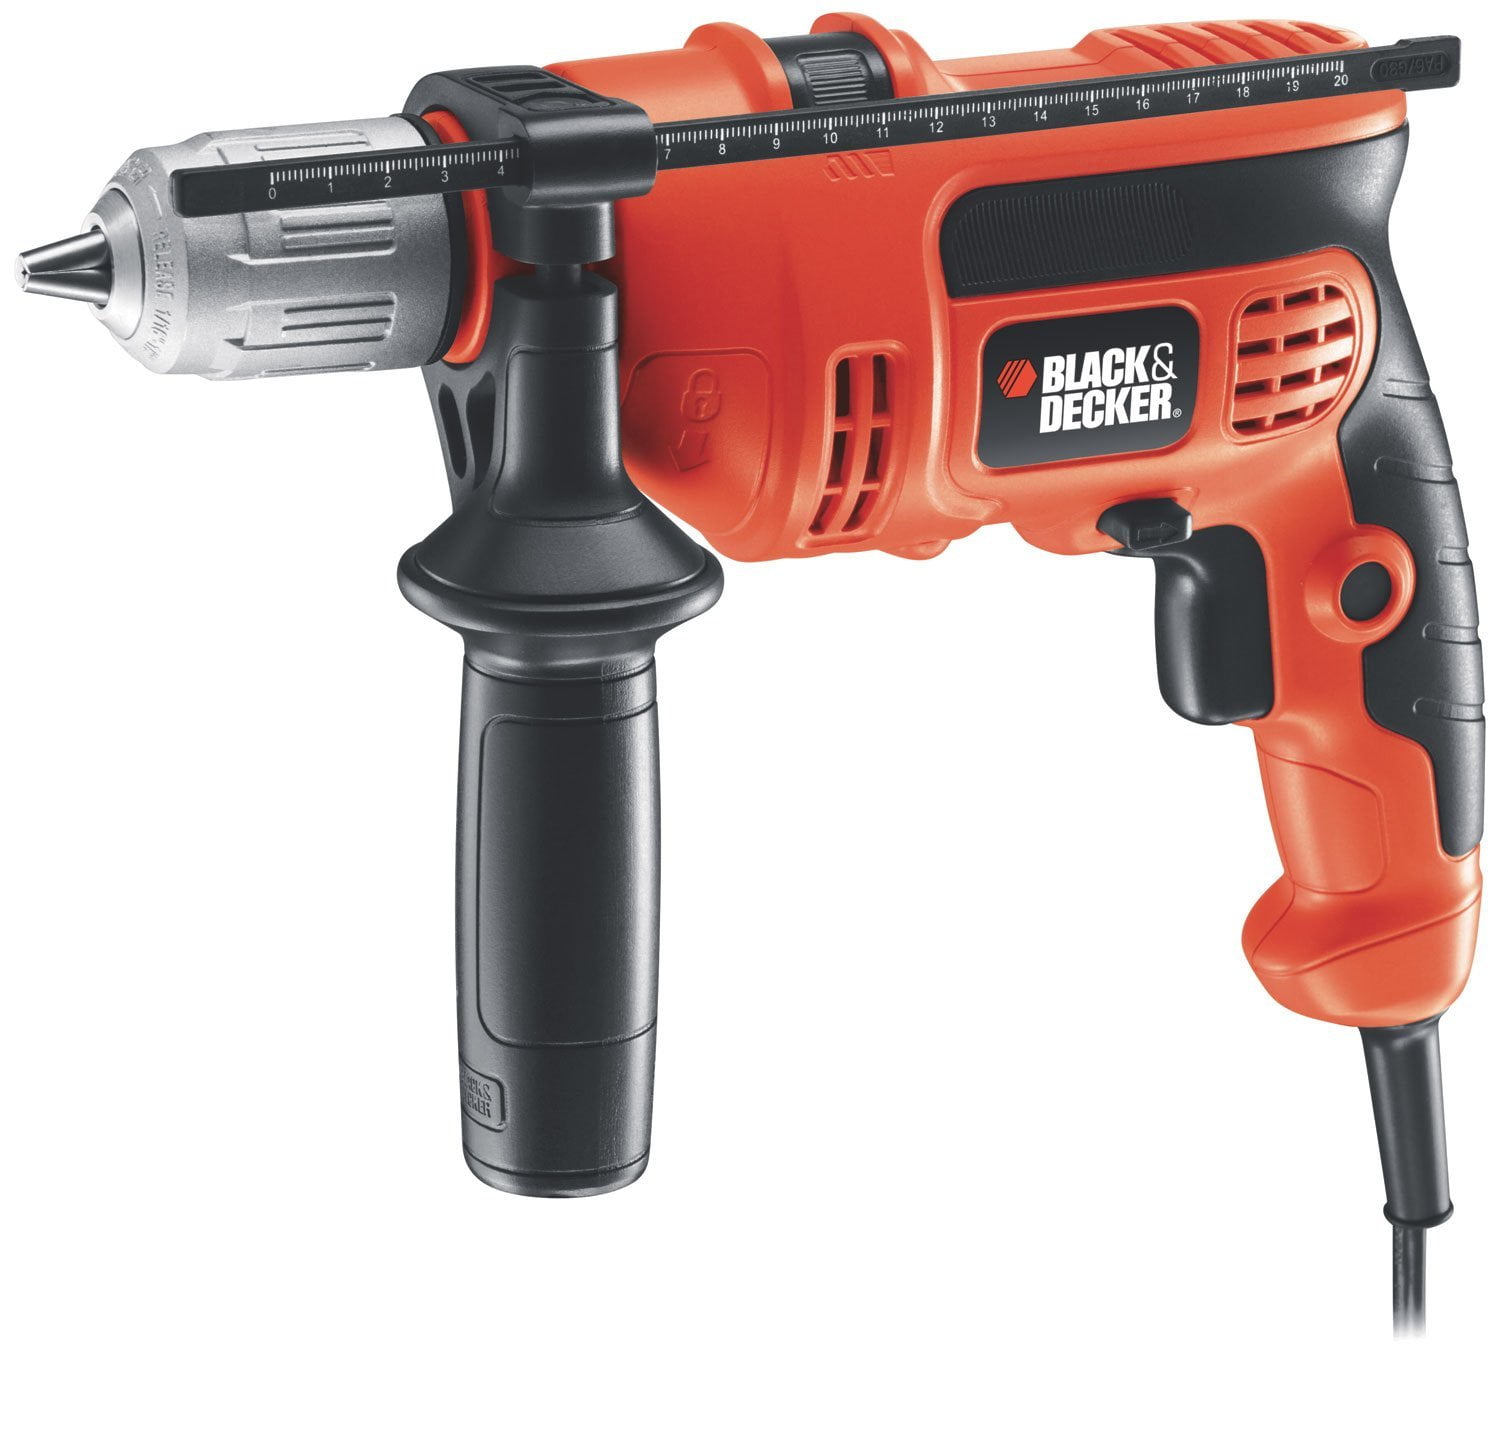 What Is The Best Impact Drill To Buy